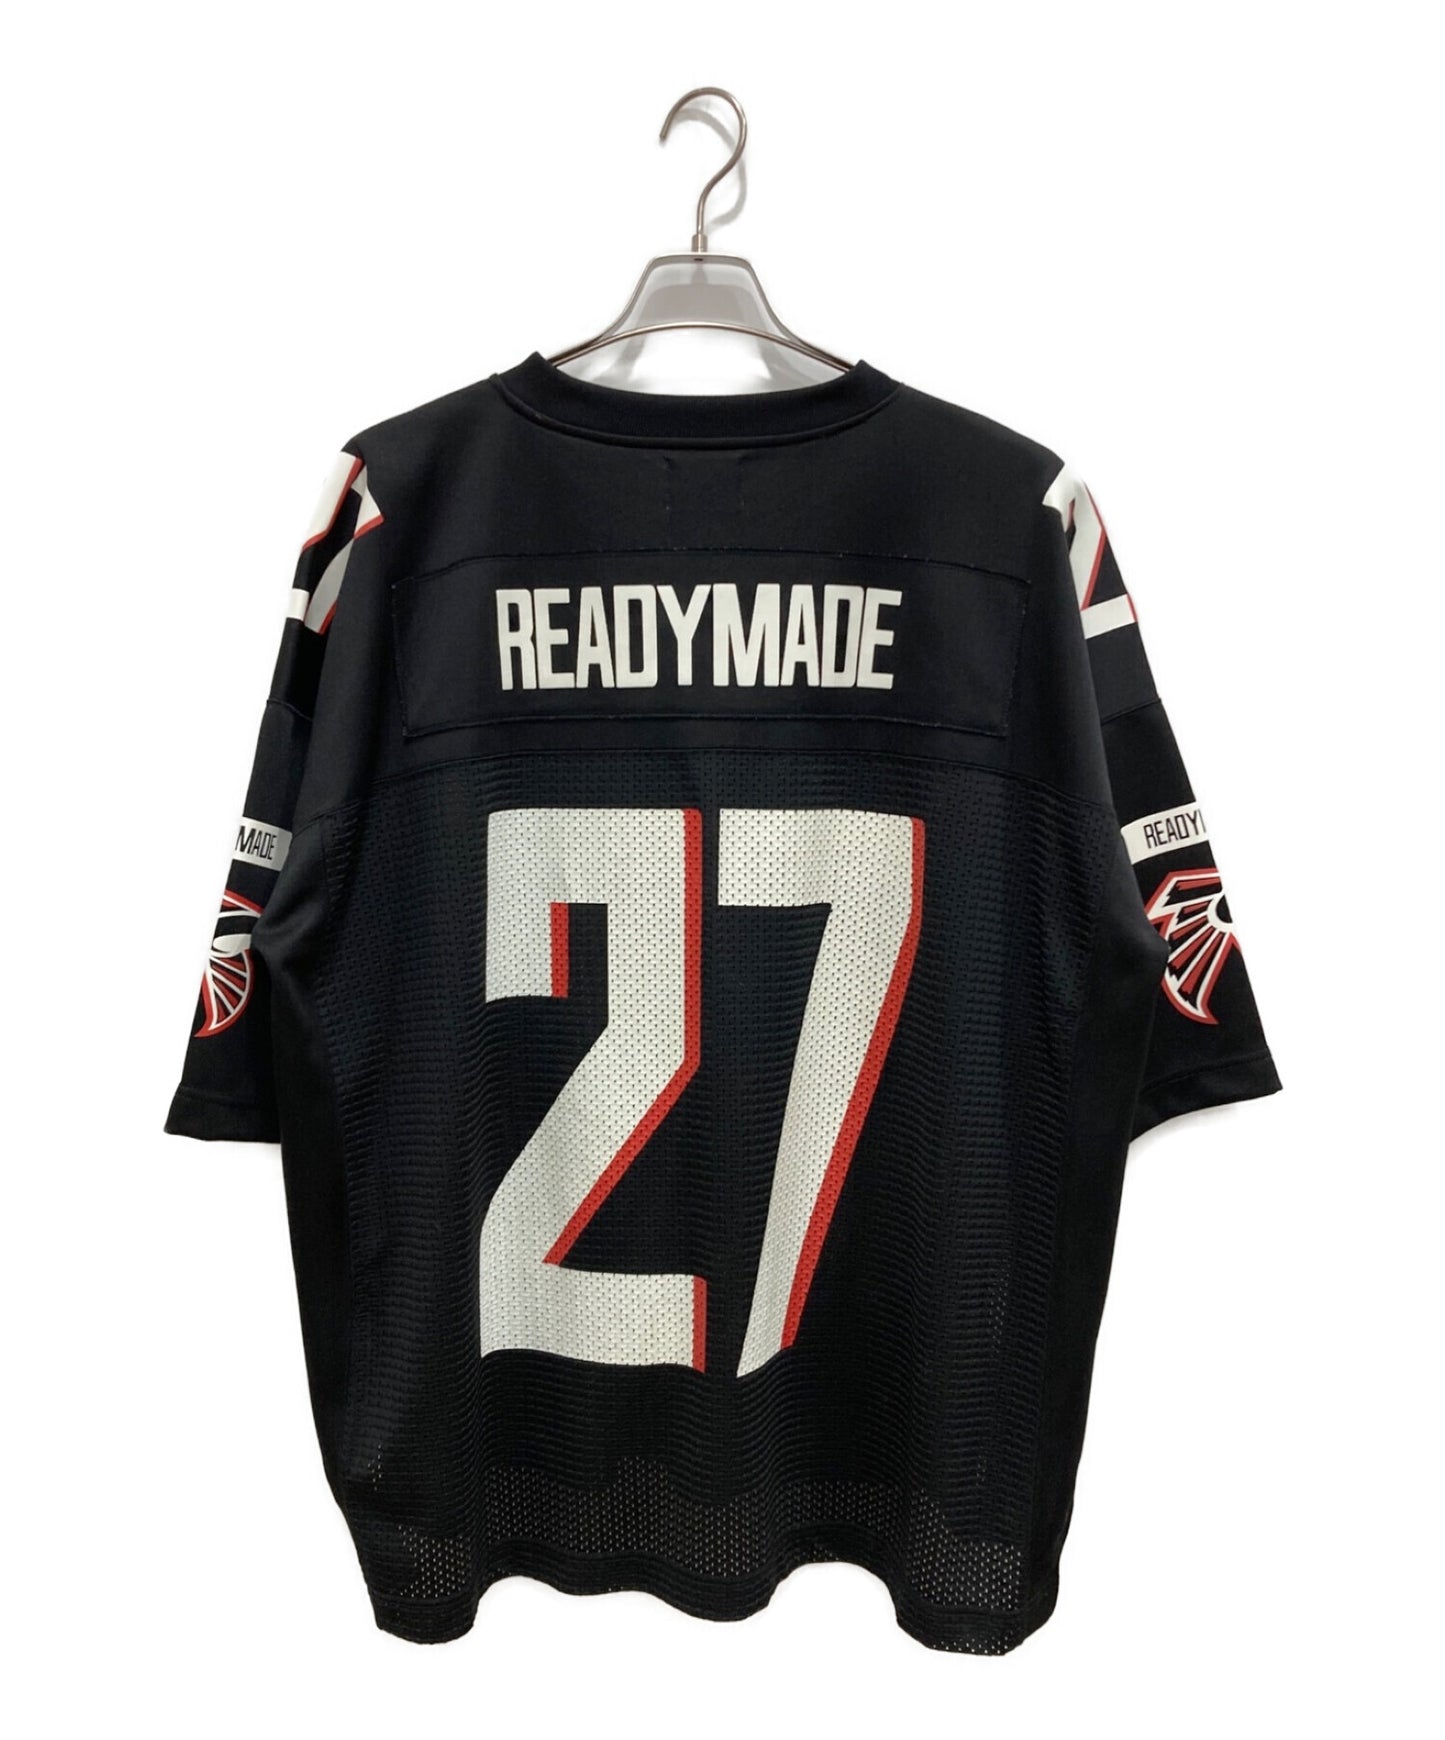 READYMADE game shirt RE-CO-BK-00-00-232 | Archive Factory